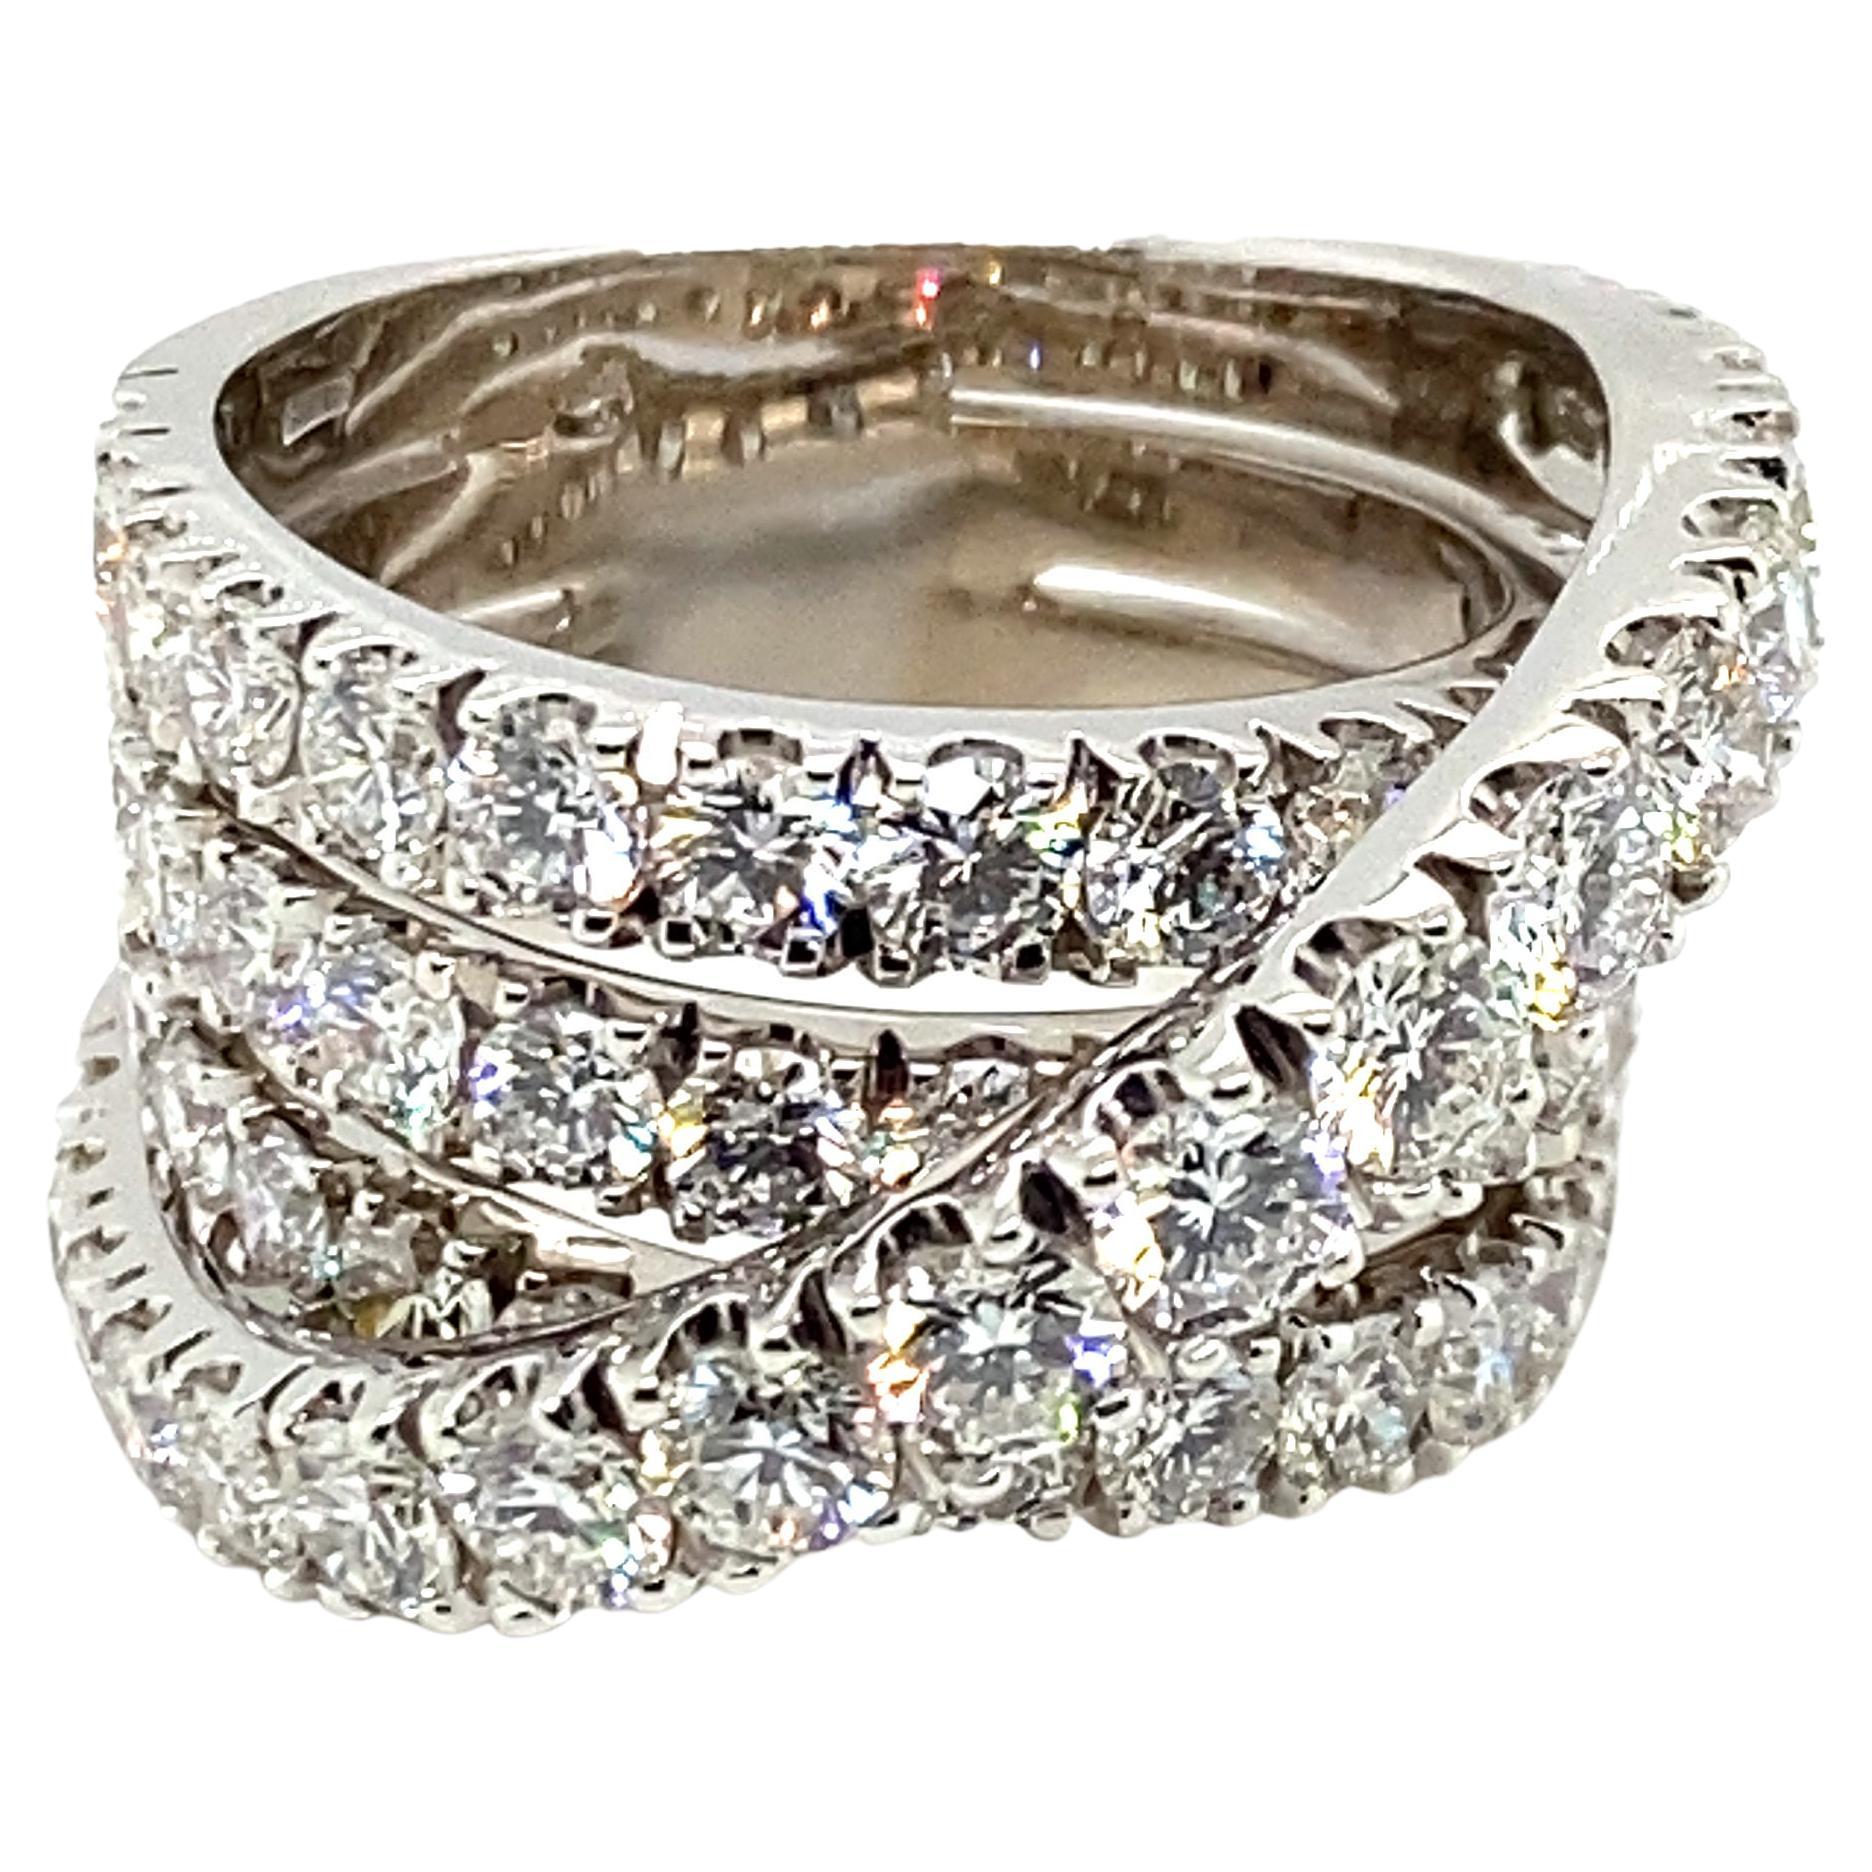 Super Sparkling Diamond Ring by Crivelli in 18 Karat White Gold For Sale